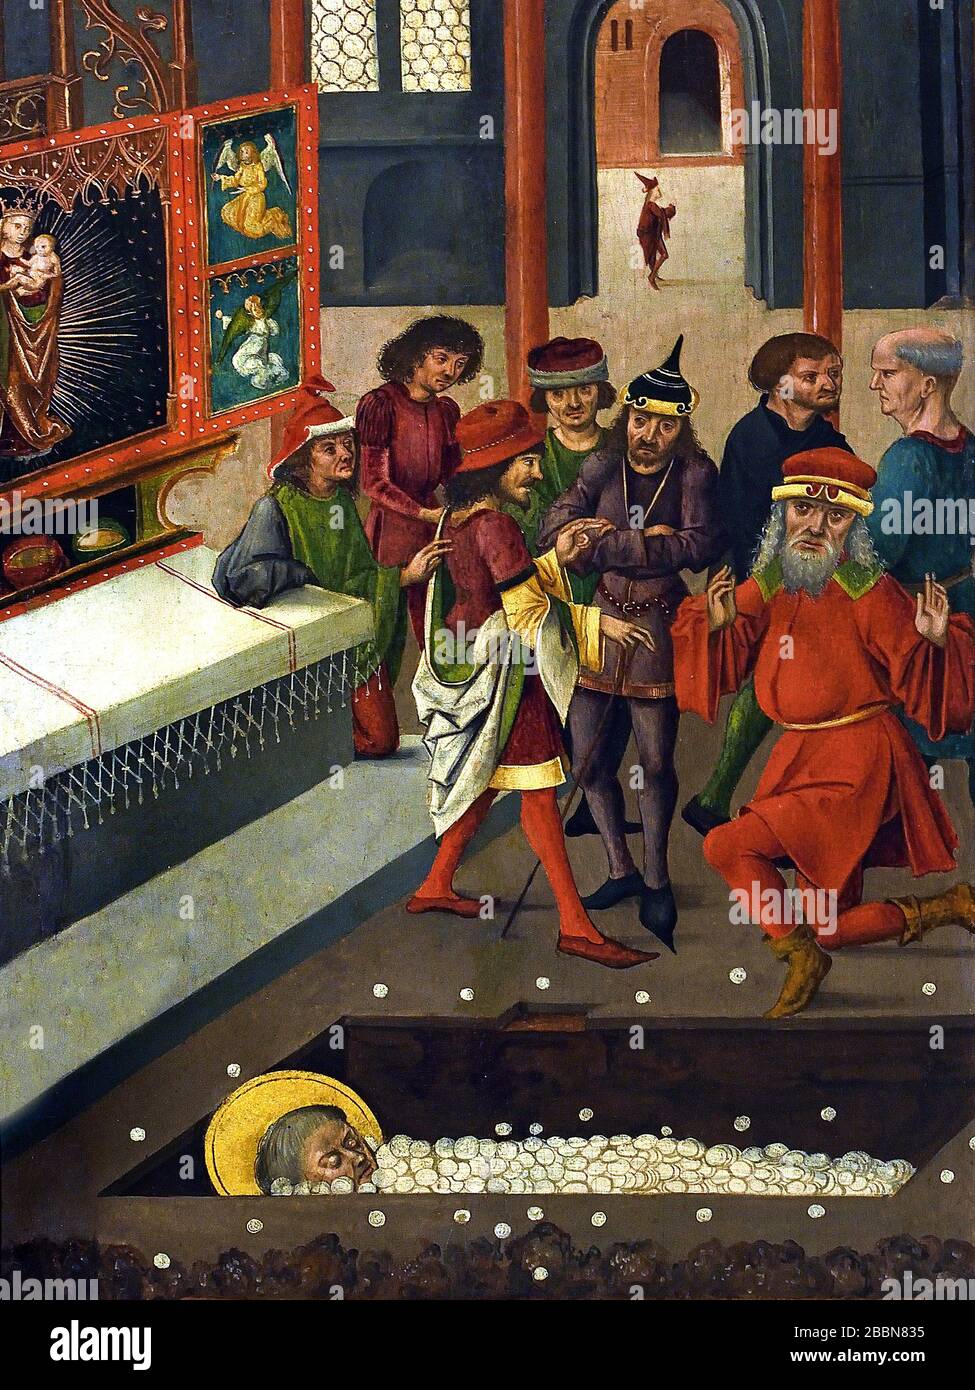 The Miracle of the Hosts at the Tomb of Saint John the Evangelist 1478 Gabriel Mälesskircher ca. 1430, Munich, 1495, German, Germany. Stock Photo